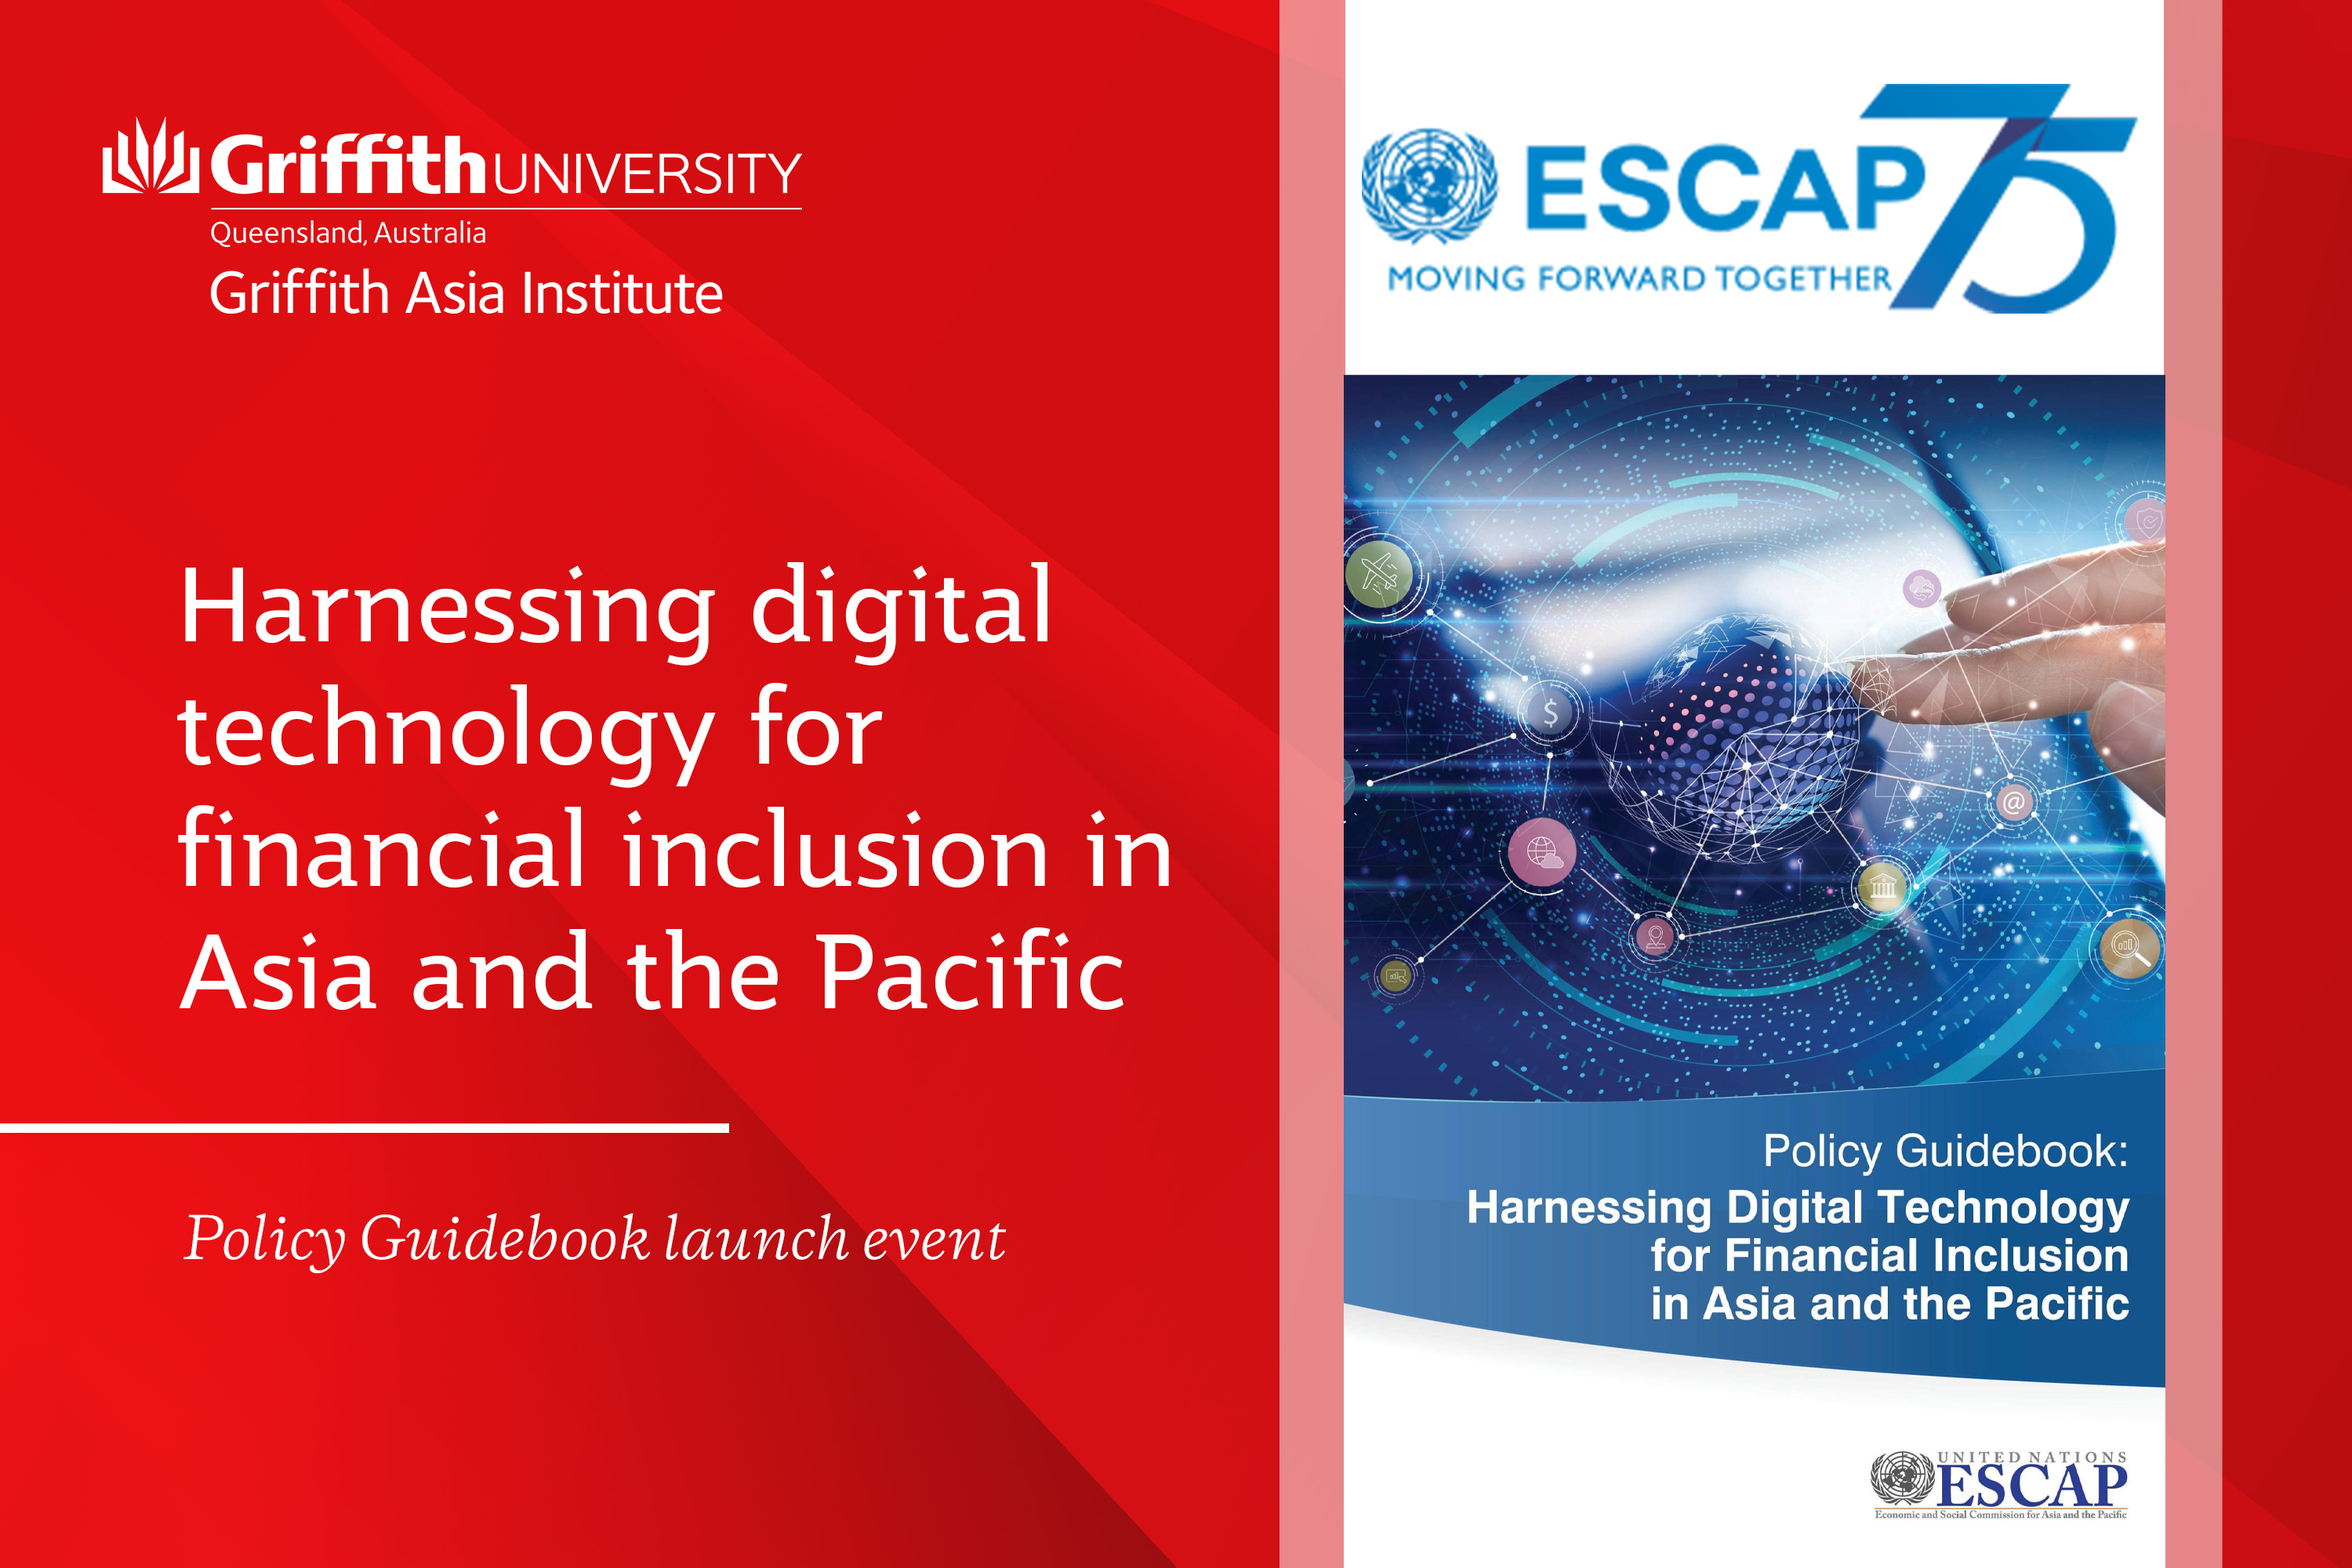 Policy Guidebook launch event: Harnessing digital technology for financial inclusion in Asia and the Pacific